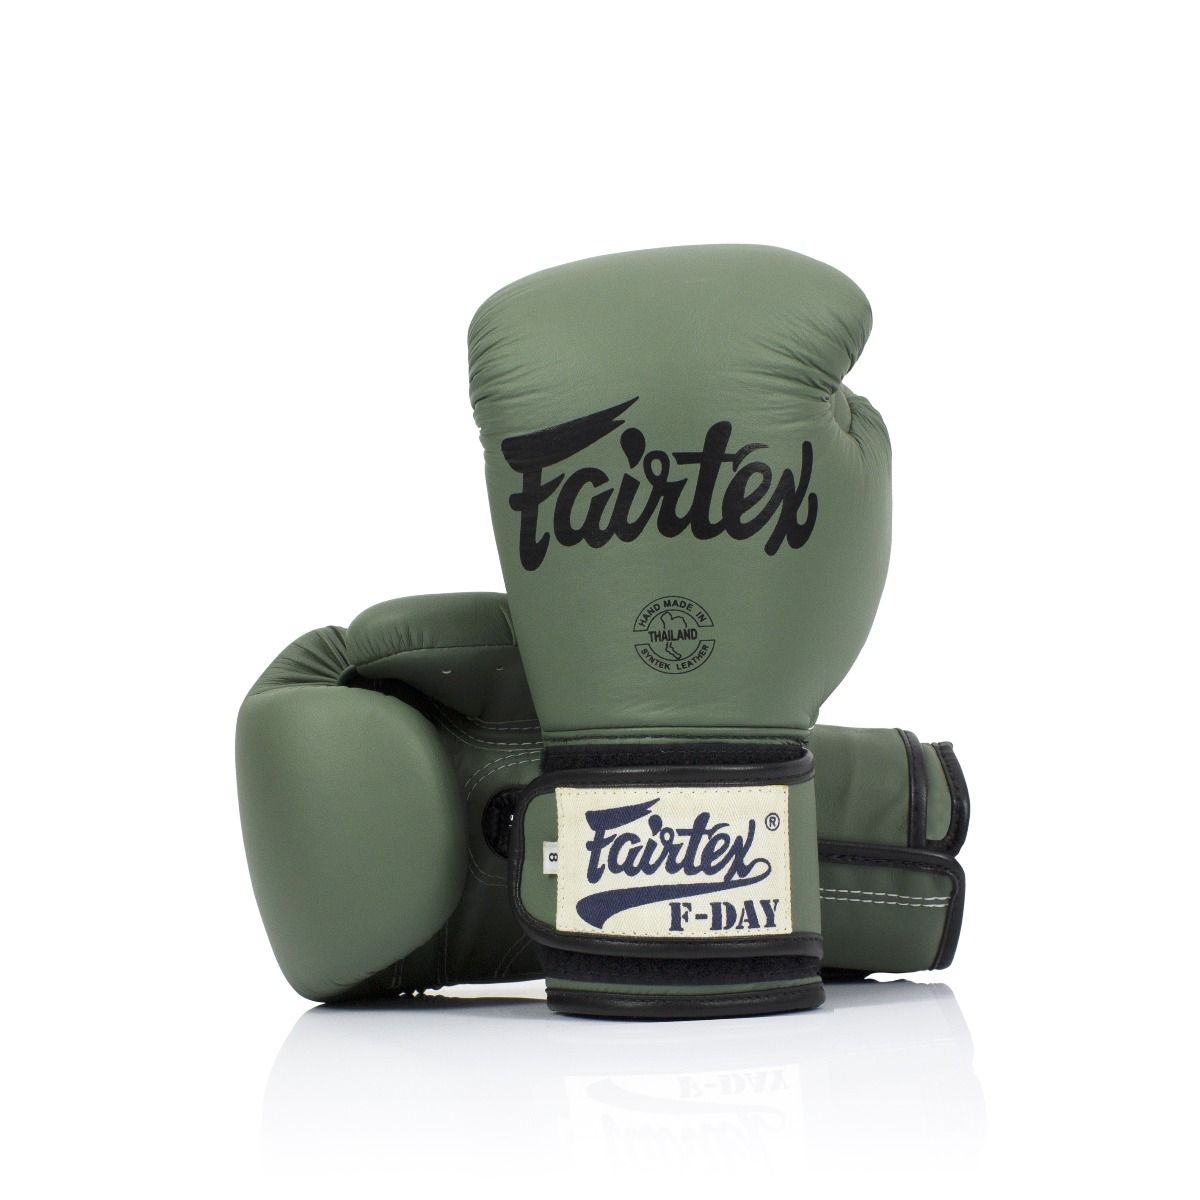 Genuine Fairtex FDAY Boxing Gloves NEW Limited Edition with Micro Fiber Material 